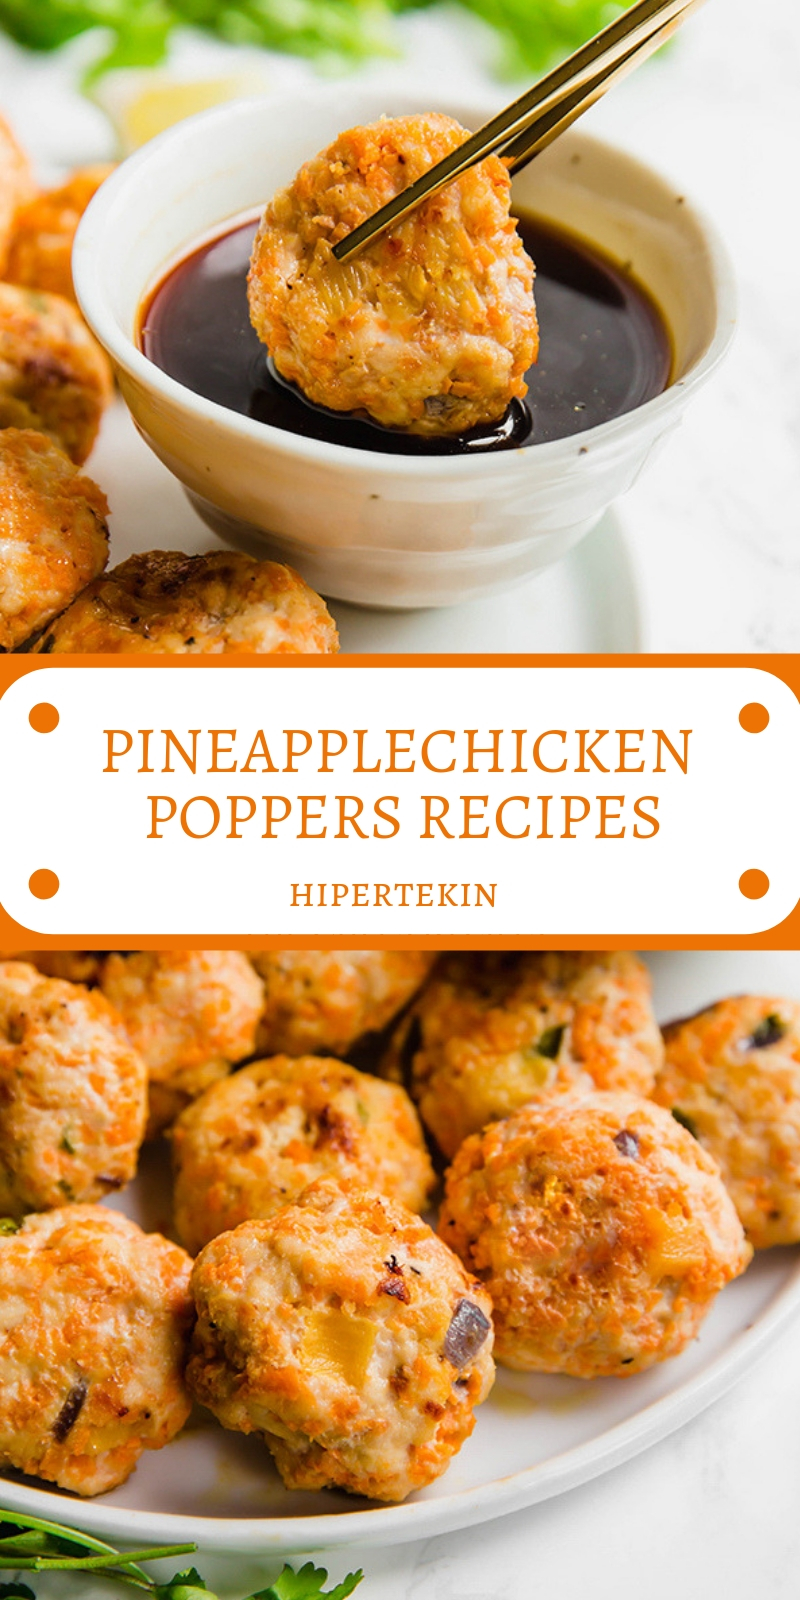 PINEAPPLECHICKEN POPPERS RECIPES